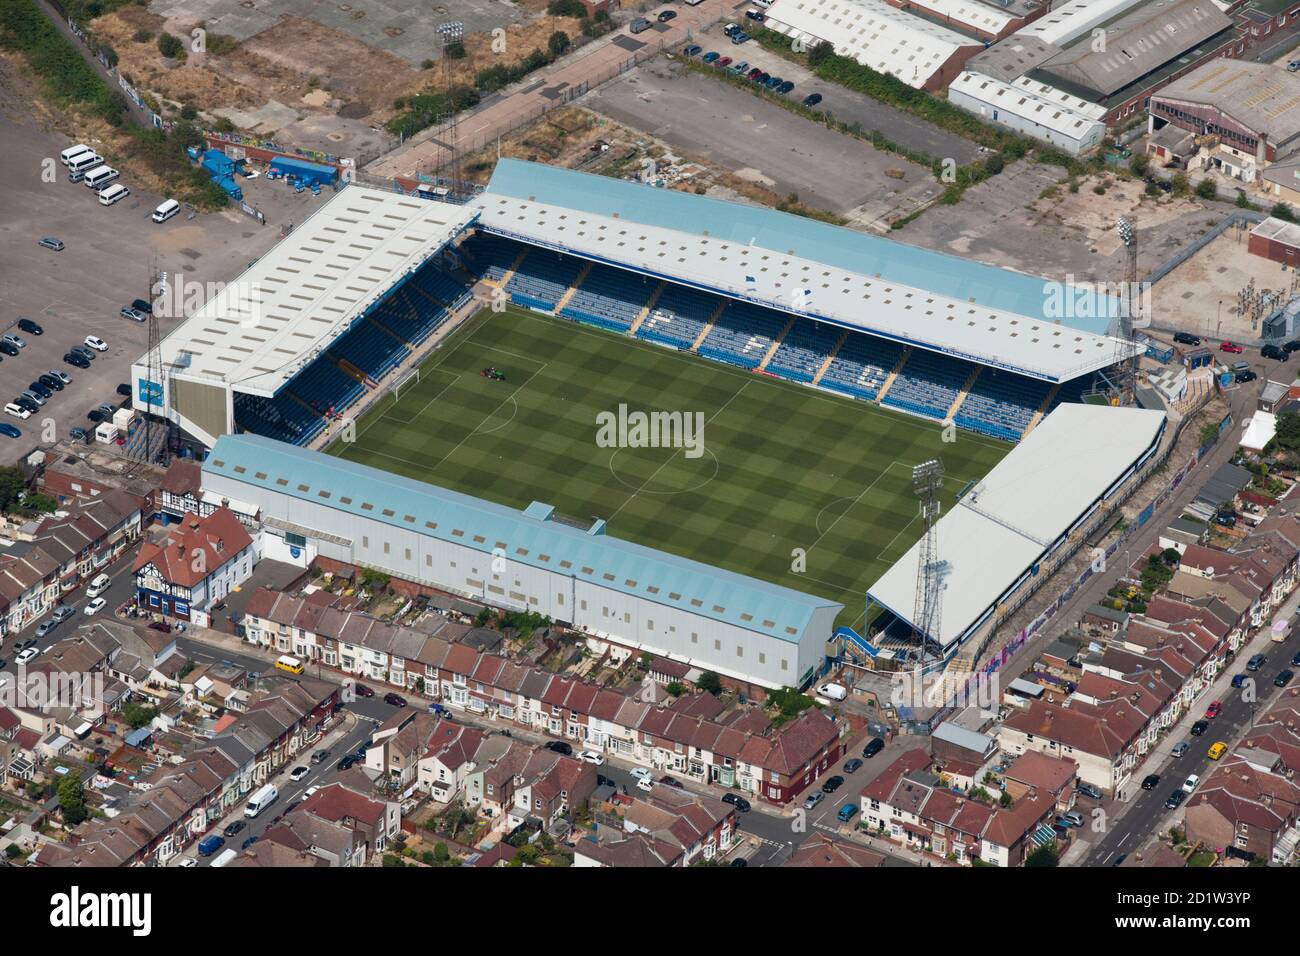 Fratton Park, home to Portsmouth Football Club, Portsmouth, Hampshire, UK. 2014. Aerial view. Stock Photo